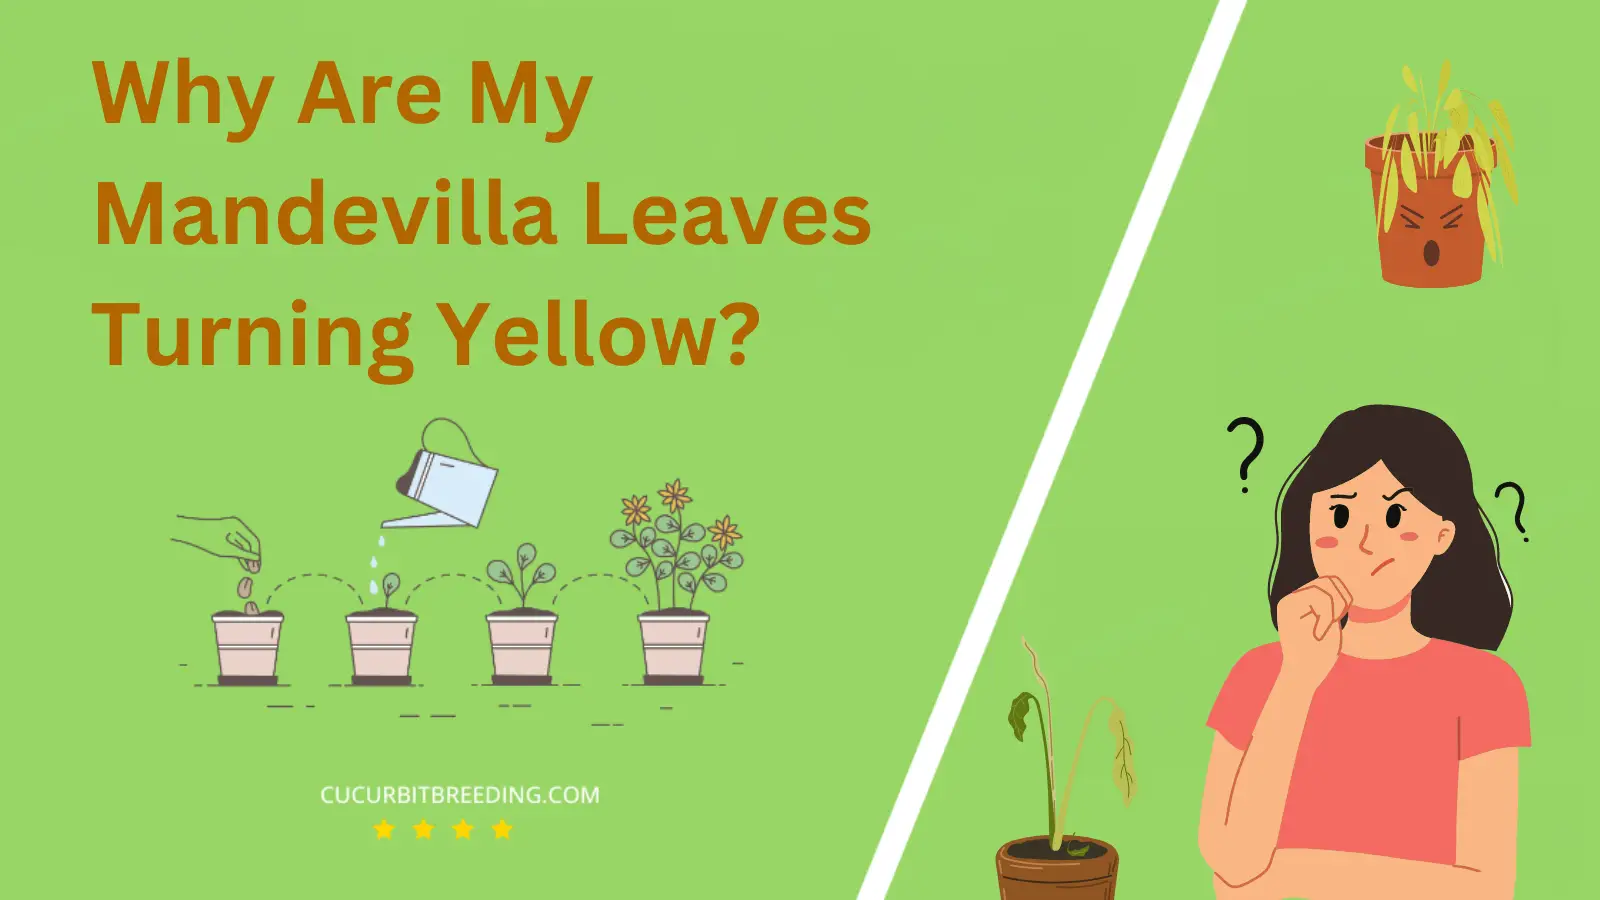 Why Are My Mandevilla Leaves Turning Yellow